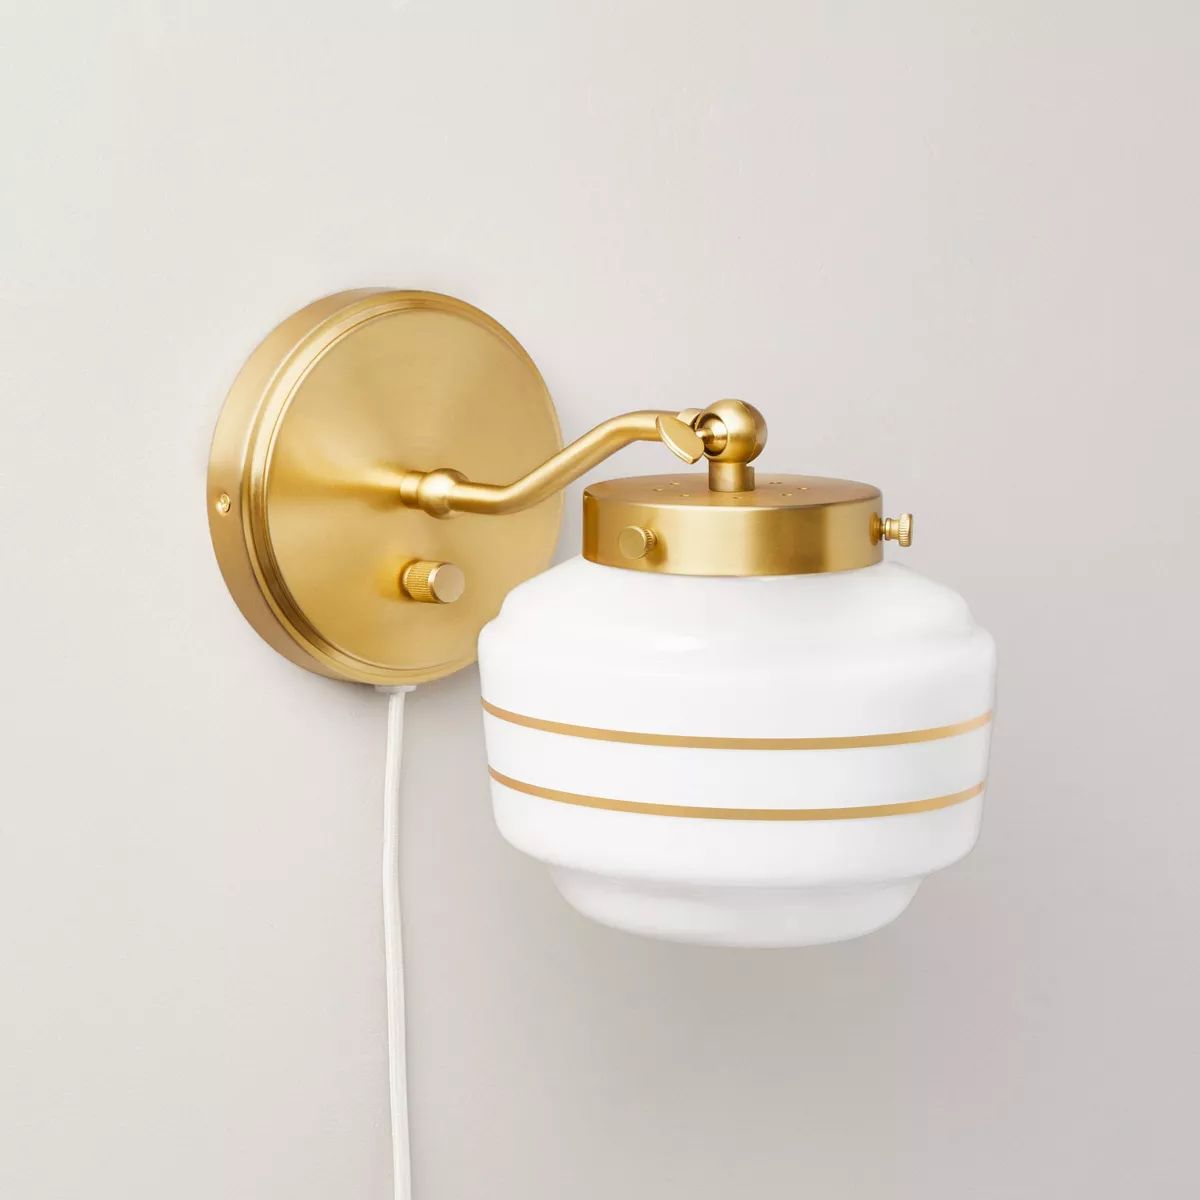 Milk Glass Striped Wall Sconce Brass Finish - Hearth & Hand™ with Magnolia | Target